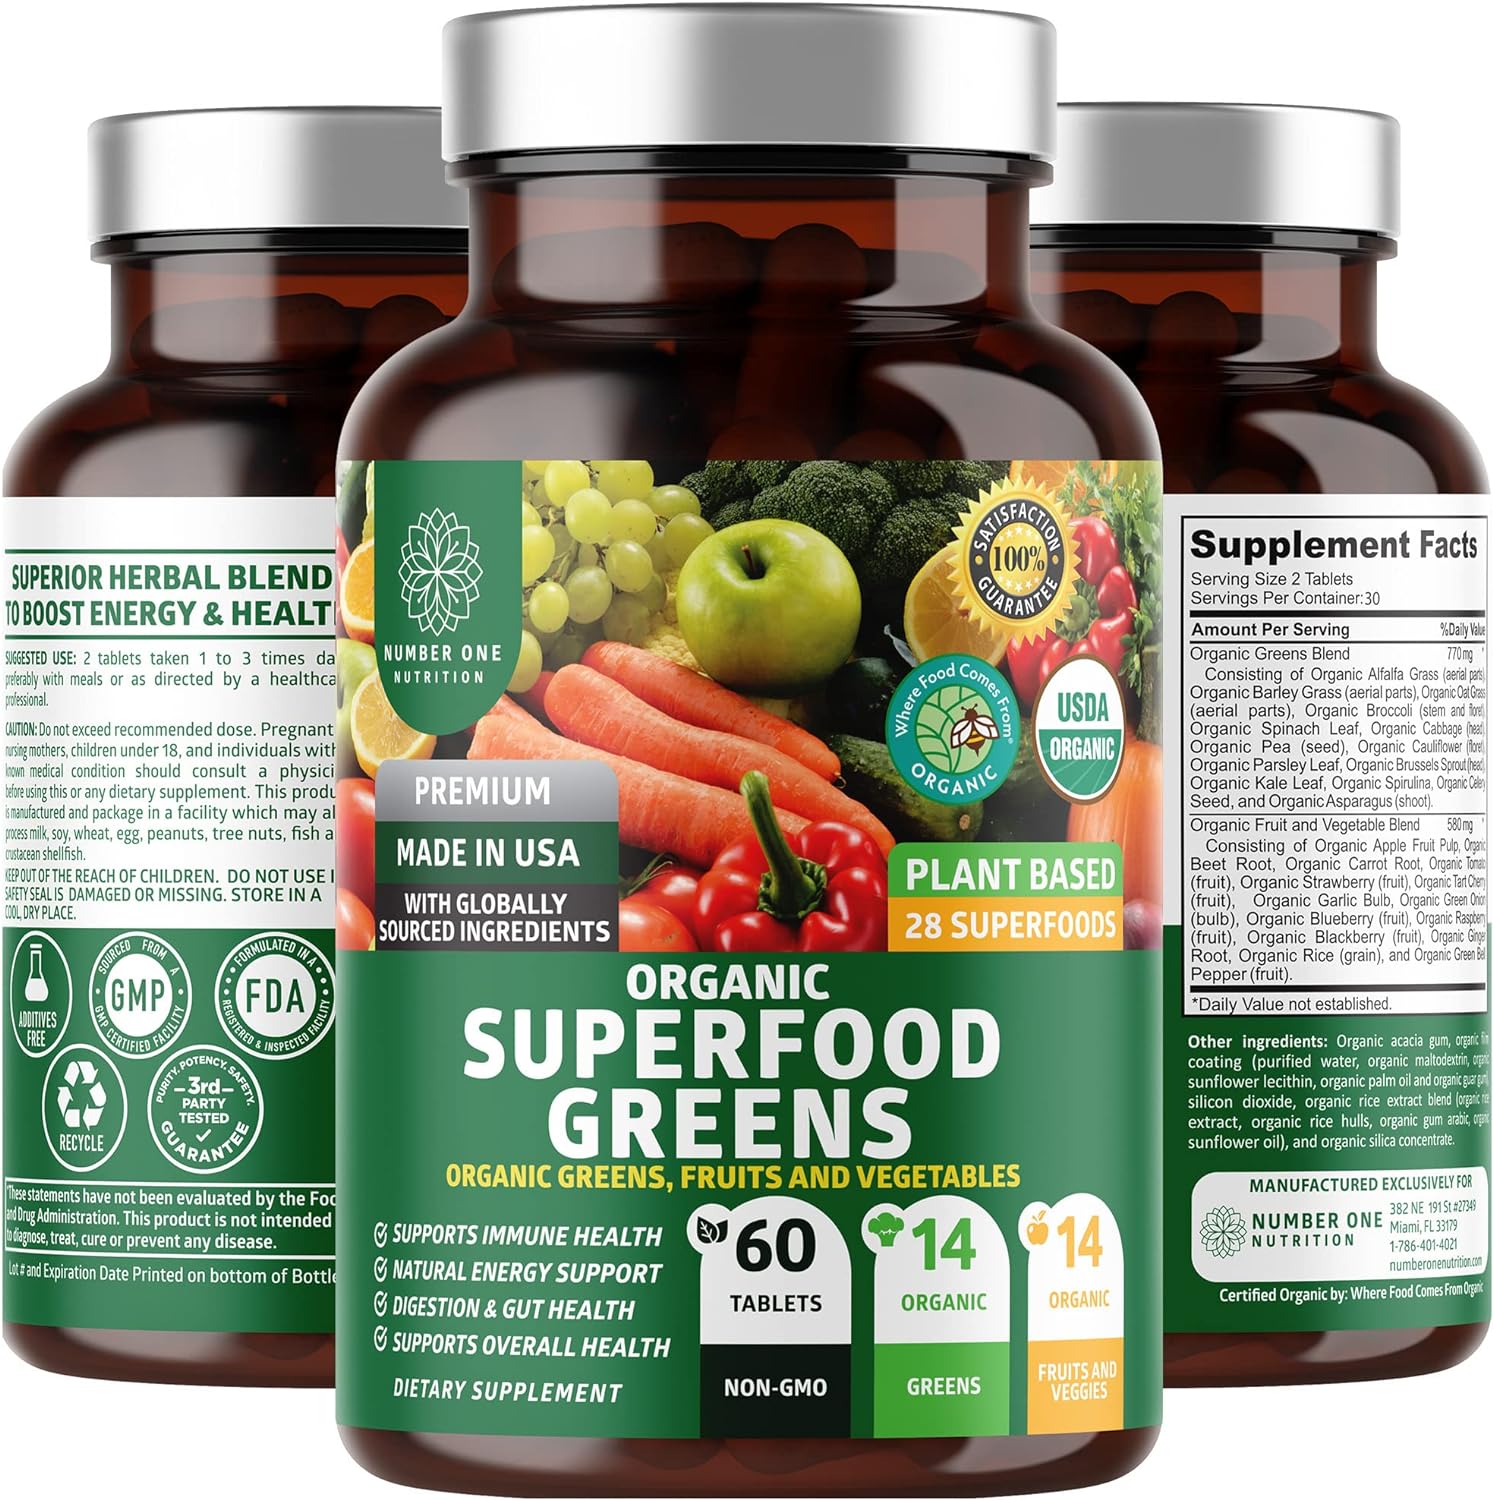 N1N Premium Organic Superfood Greens [28 Powerful Ingredients] Natural Fruit and Veggie Supplement with Alfalfa, Beet Root and Ginger to Boost Energy, Immunity and Gut Health, Made in USA, 60 Ct